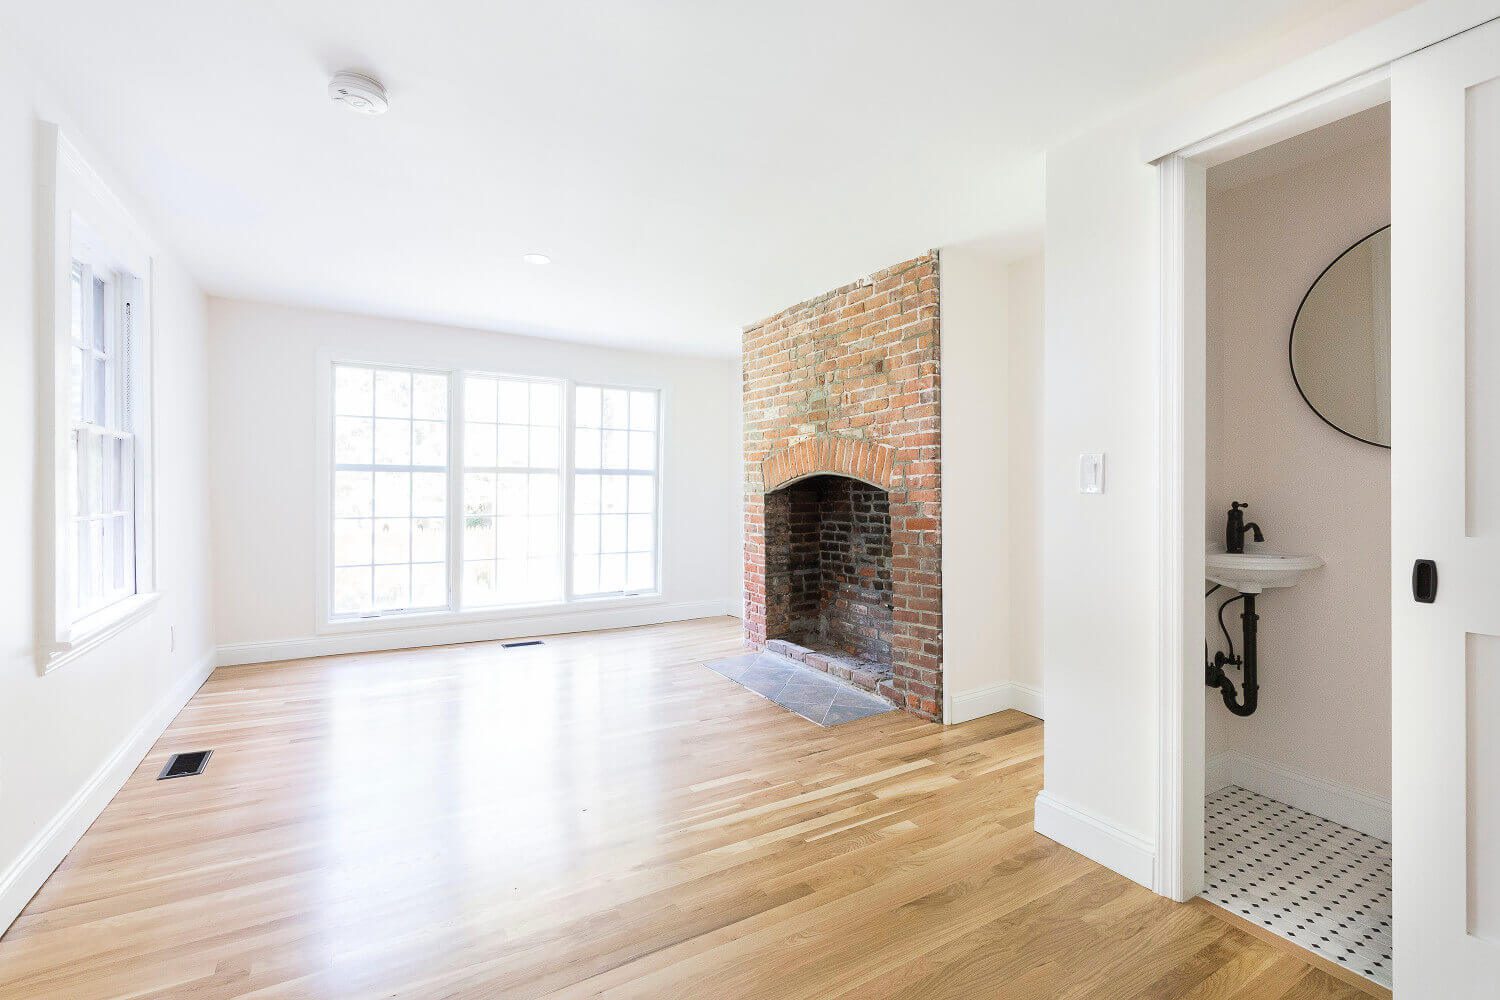 Full-Historic-Home-Renovation-Downtown-Jersey-City-A-Vision-Made-Real-07